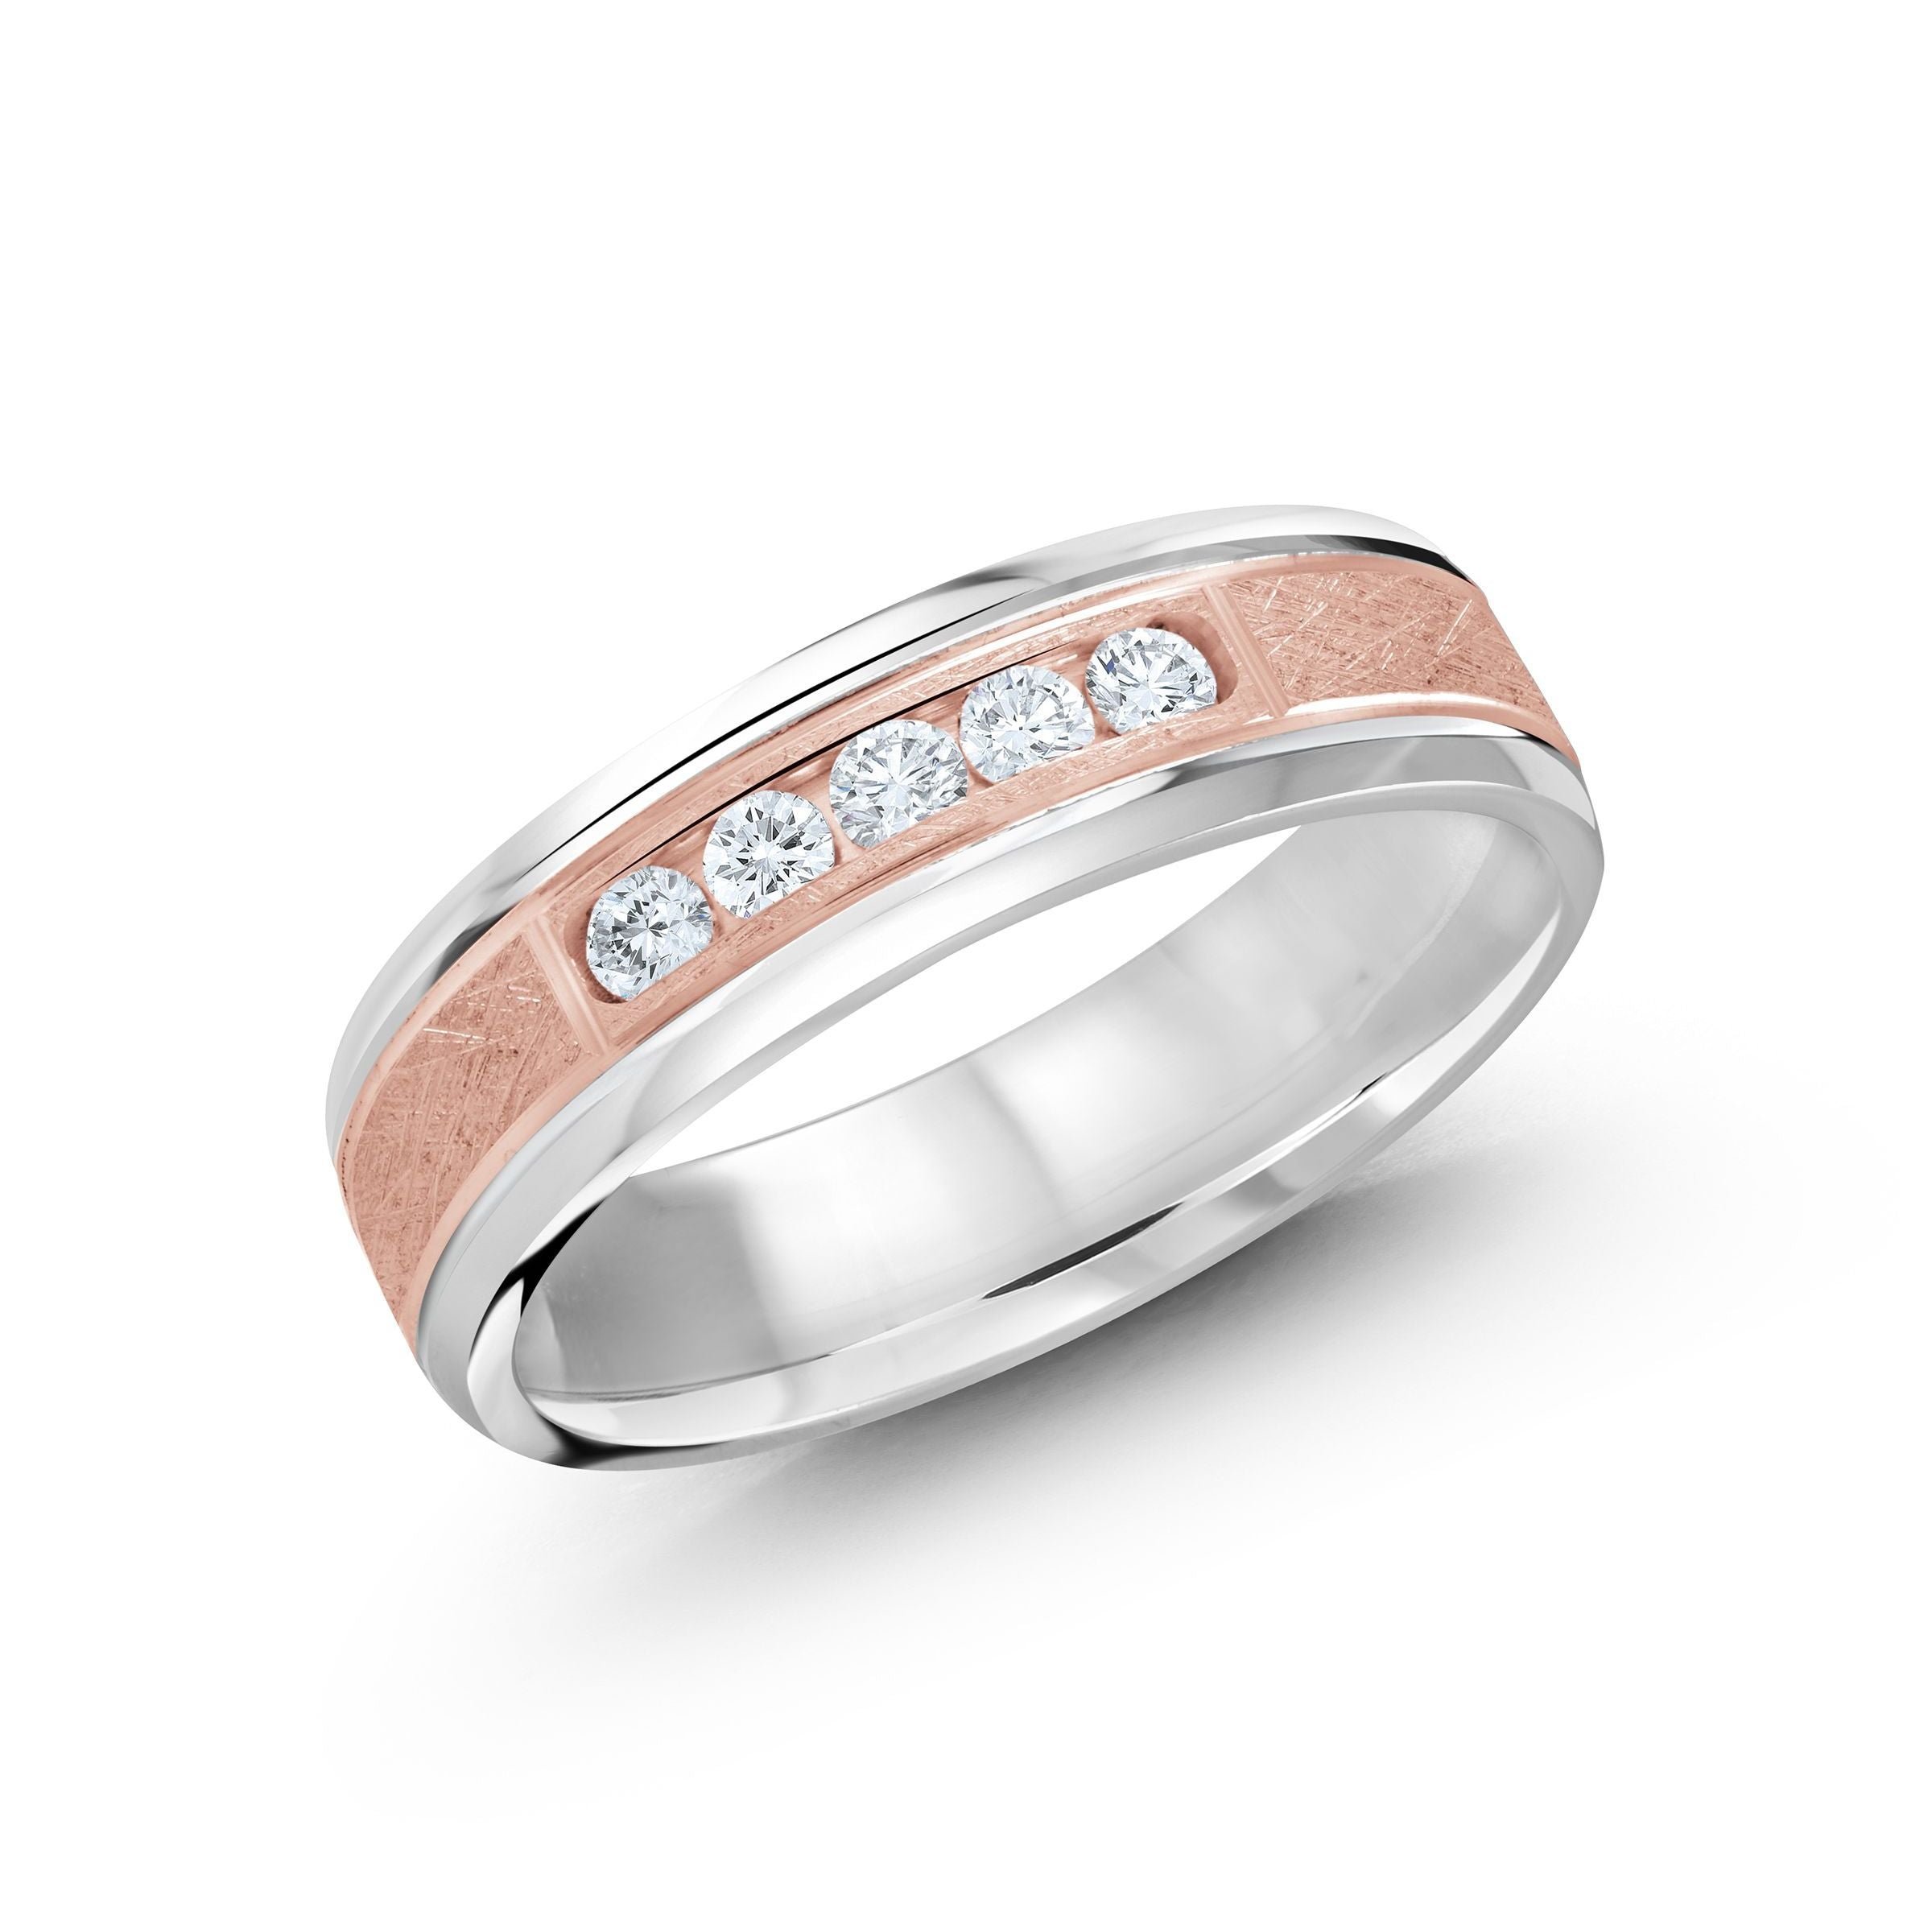 14kt White Gold & 14kt Rose Gold/18kt White Gold & 18kt Rose Gold/earth grown/lab grown/top